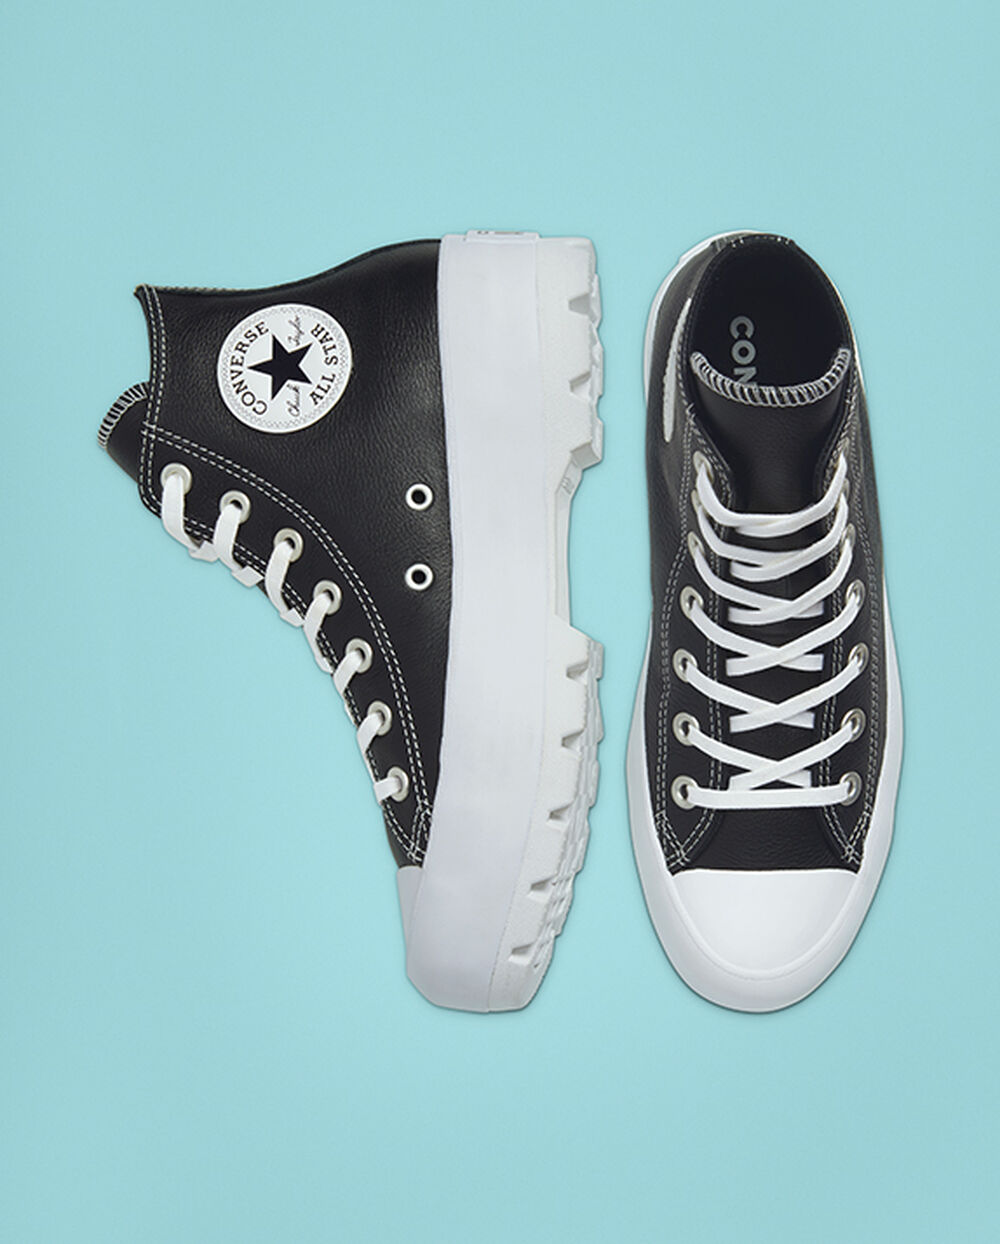 Tenis Converse Chuck Taylor All Star Mujer Negros Blancos | Mexico-517346